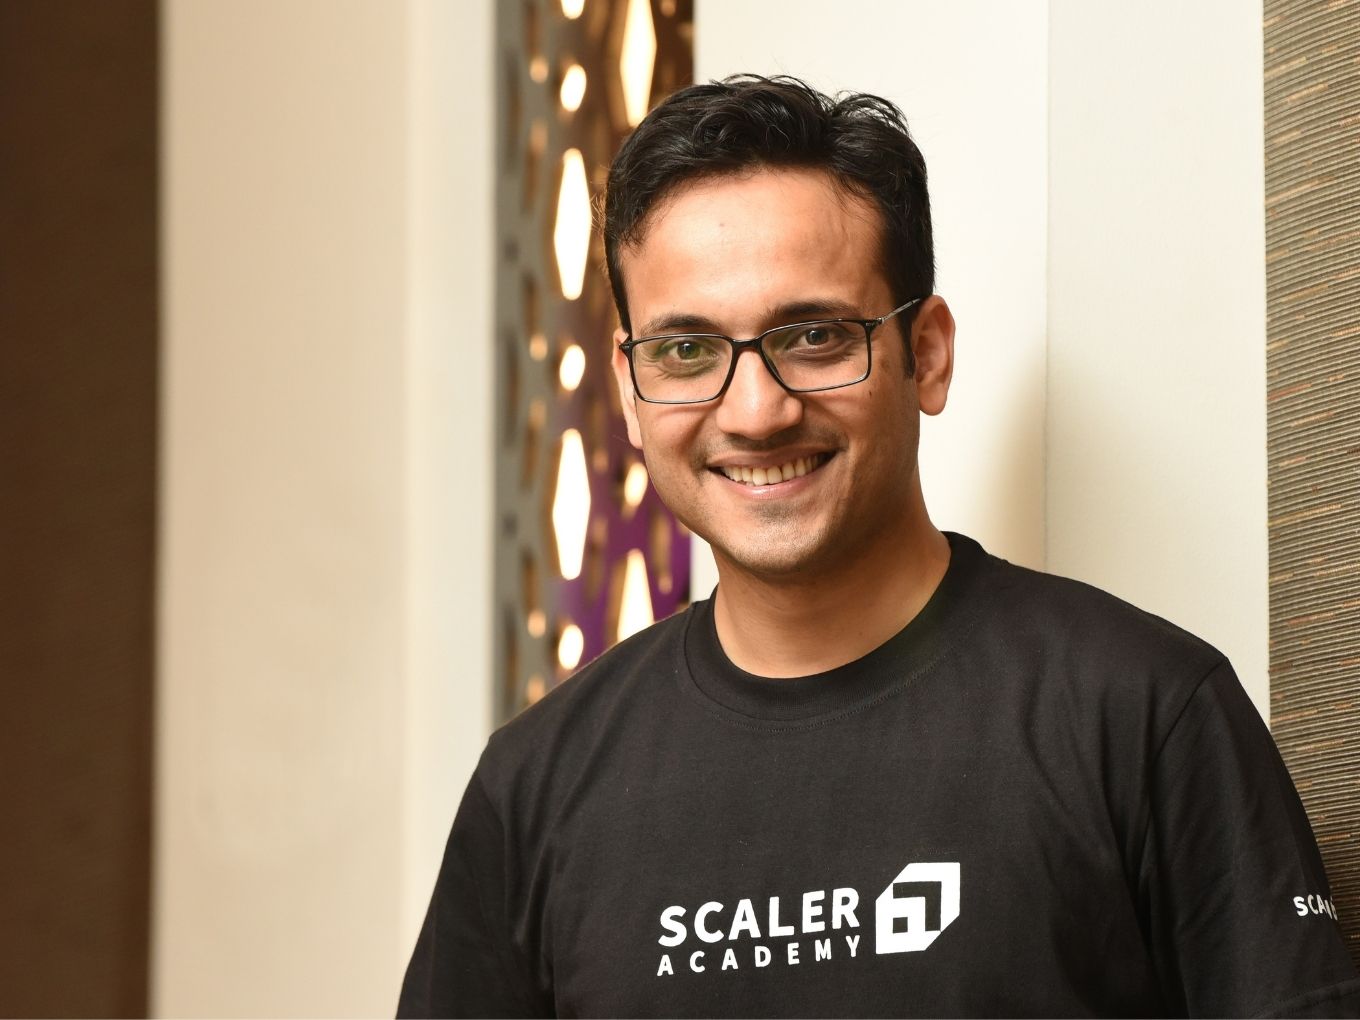 You are currently viewing Upskilling Startup Scaler Academy Raises $55 Mn, Valuation Touches $710 Mn